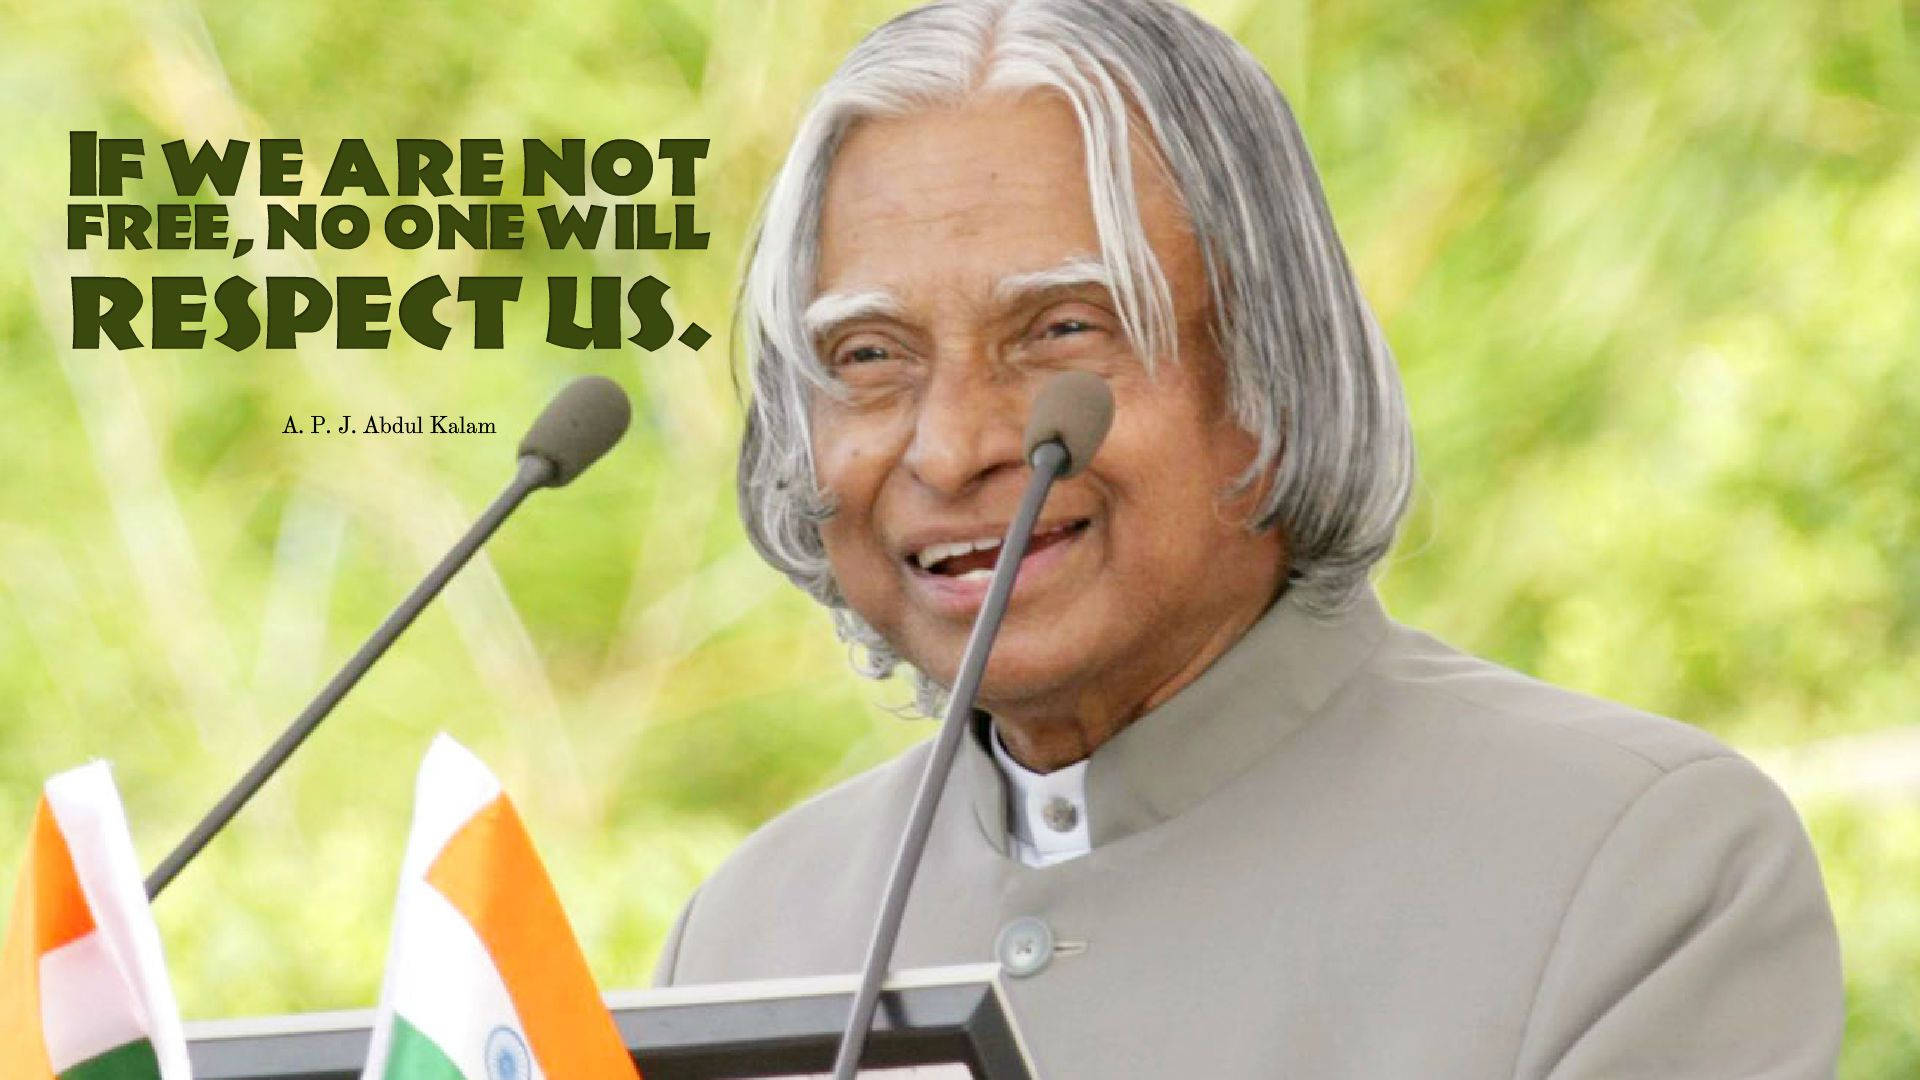 Abdul Kalam Hd Freedom And Respect Quote